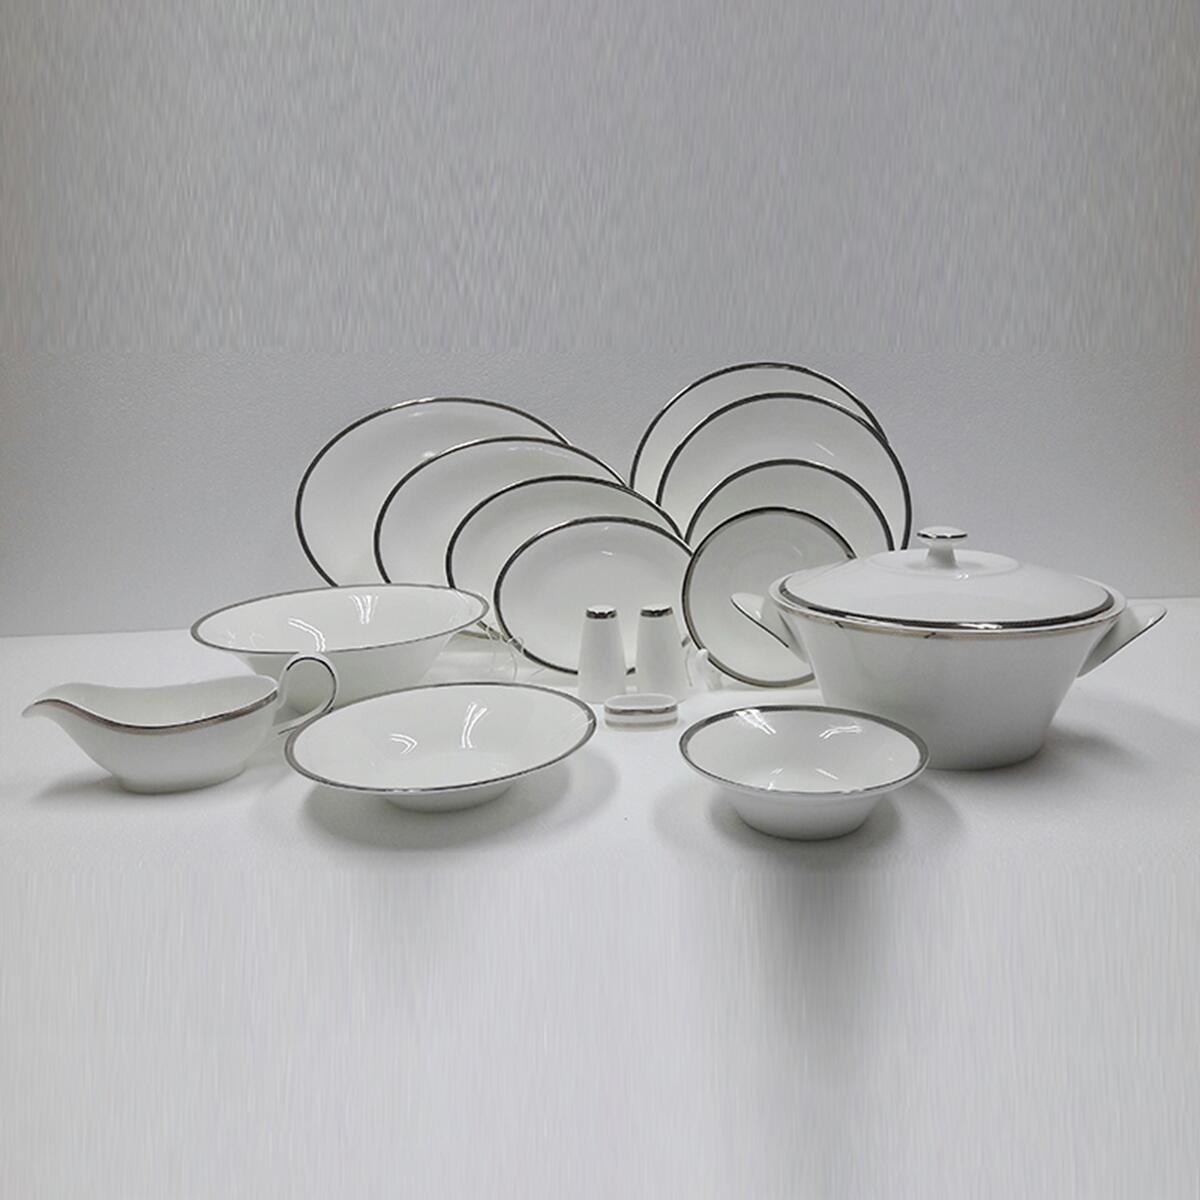 Evaliza Coupe Paisley Platinum 60 Piece Dinner Set for 12 Persons